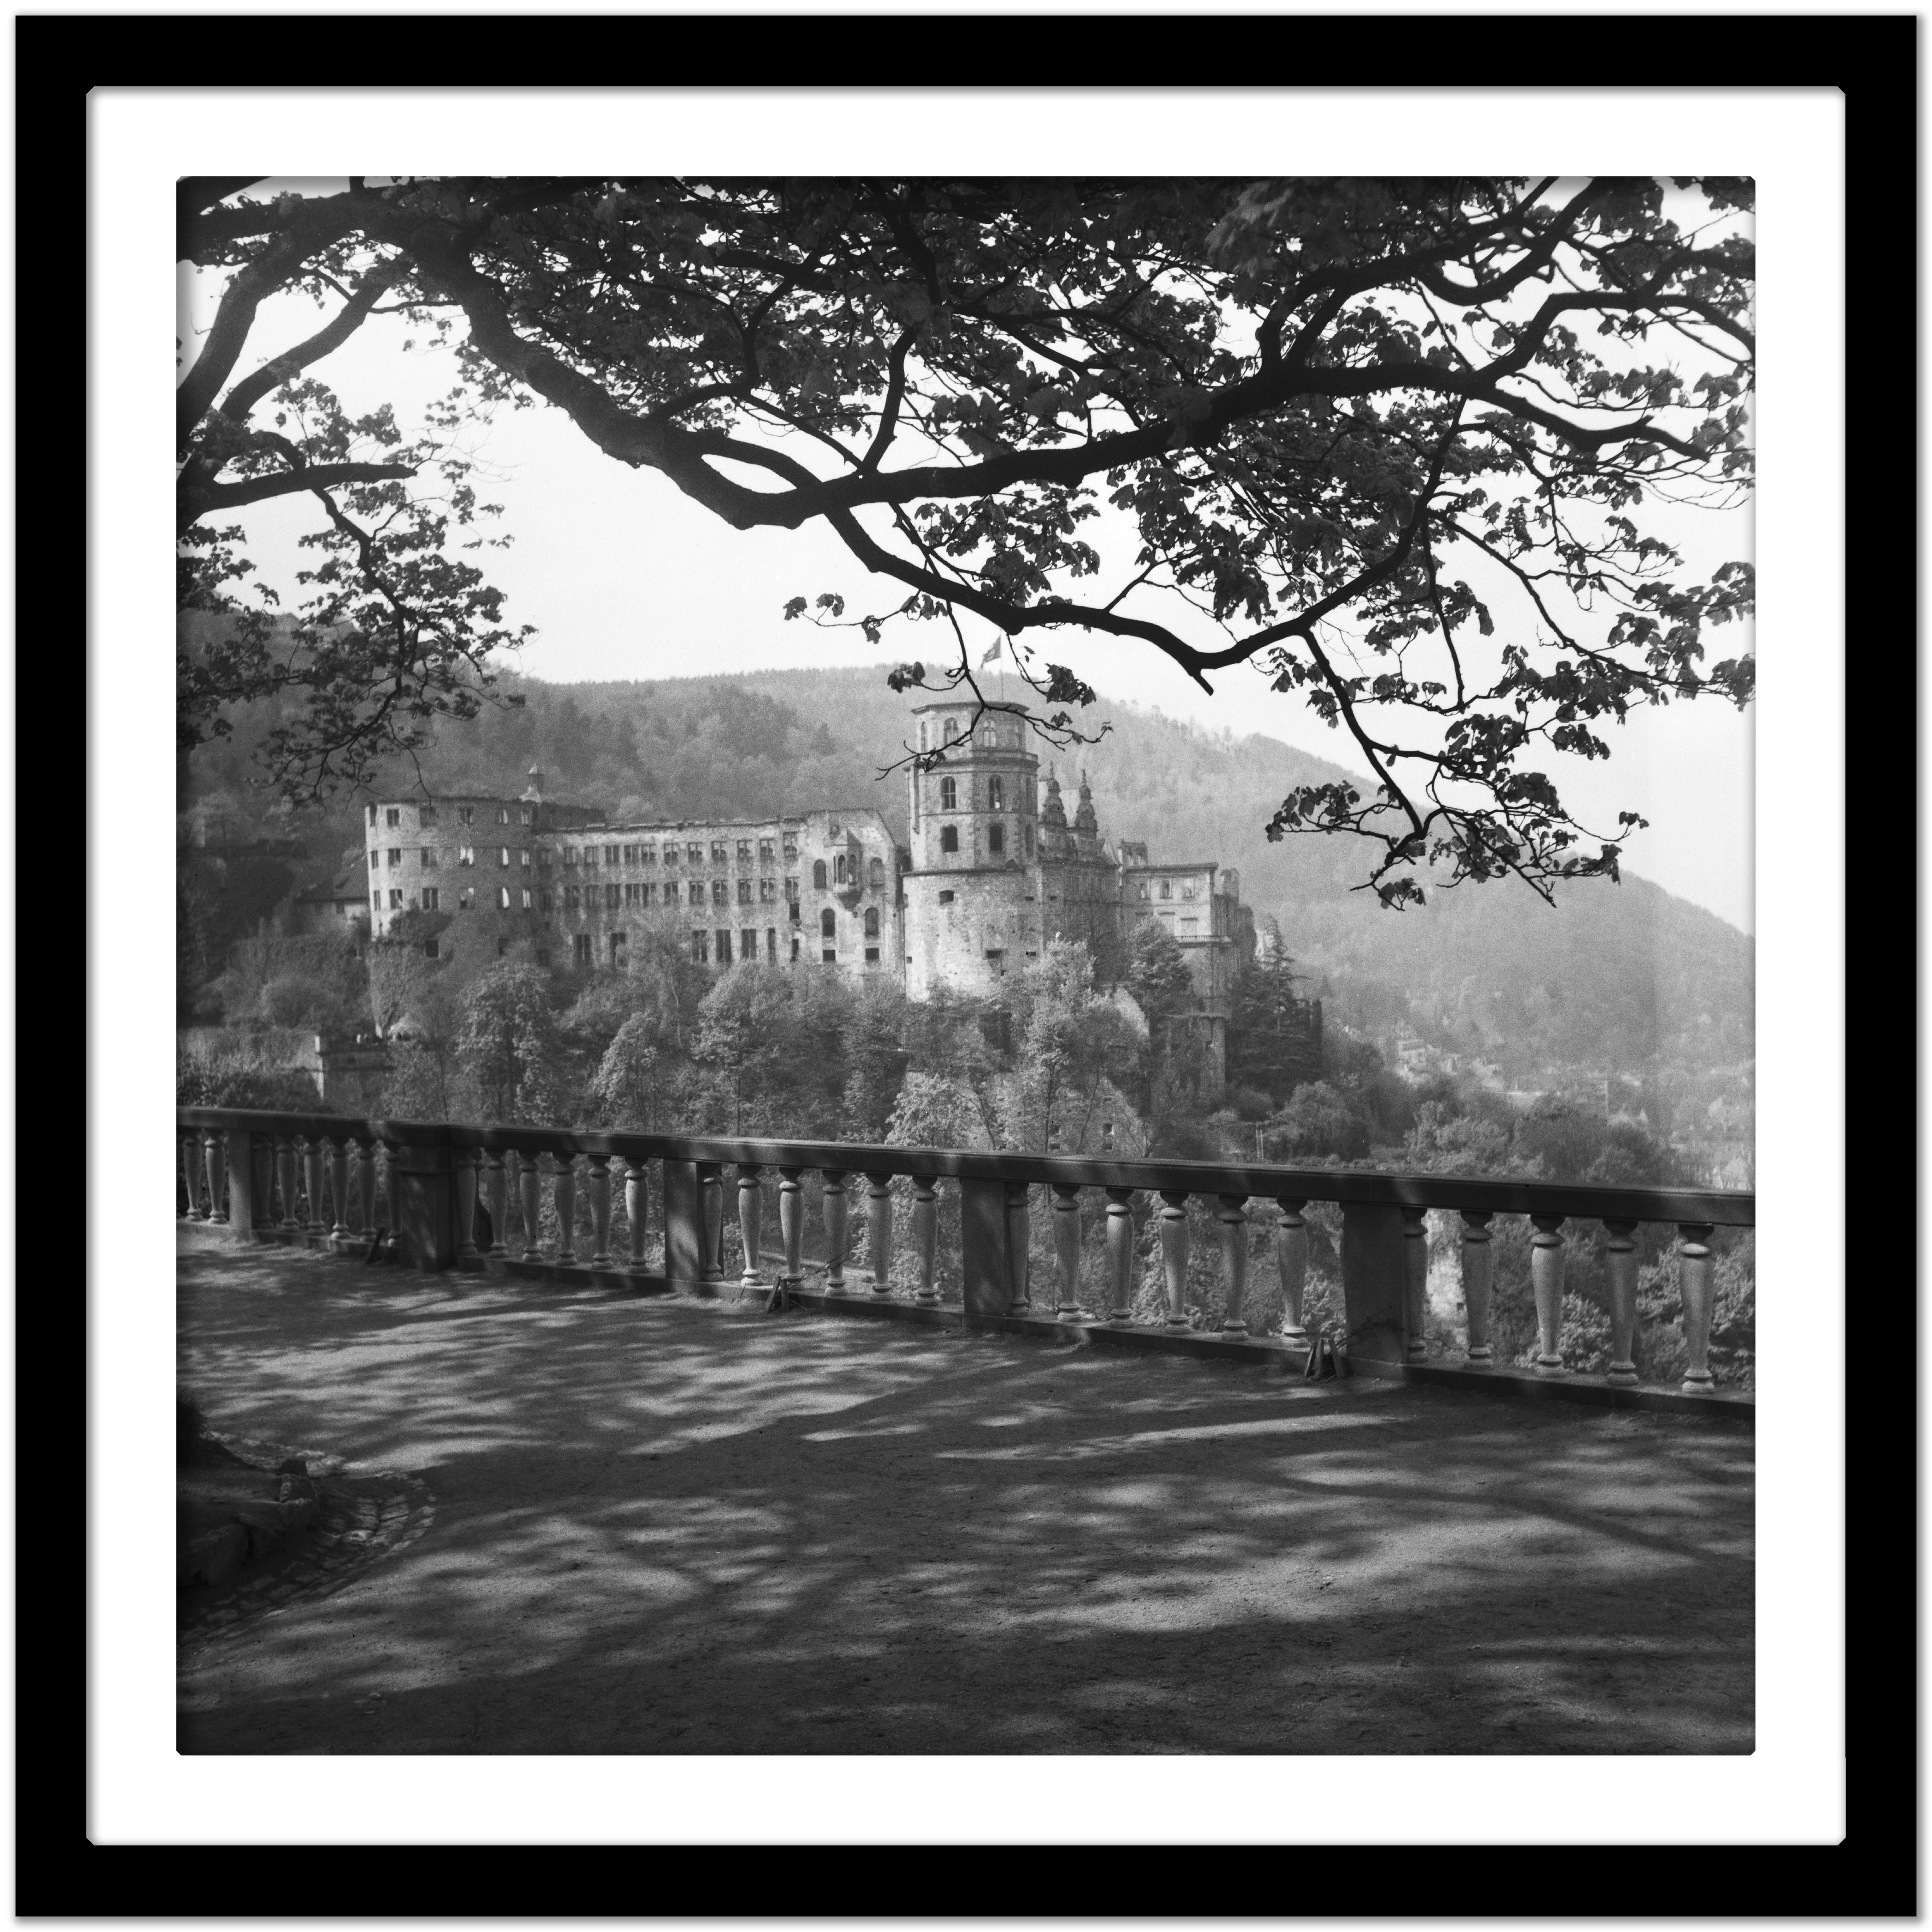 View to the Heidelberg castle, Germany 1938, Printed Later - Black Black and White Photograph by Karl Heinrich Lämmel